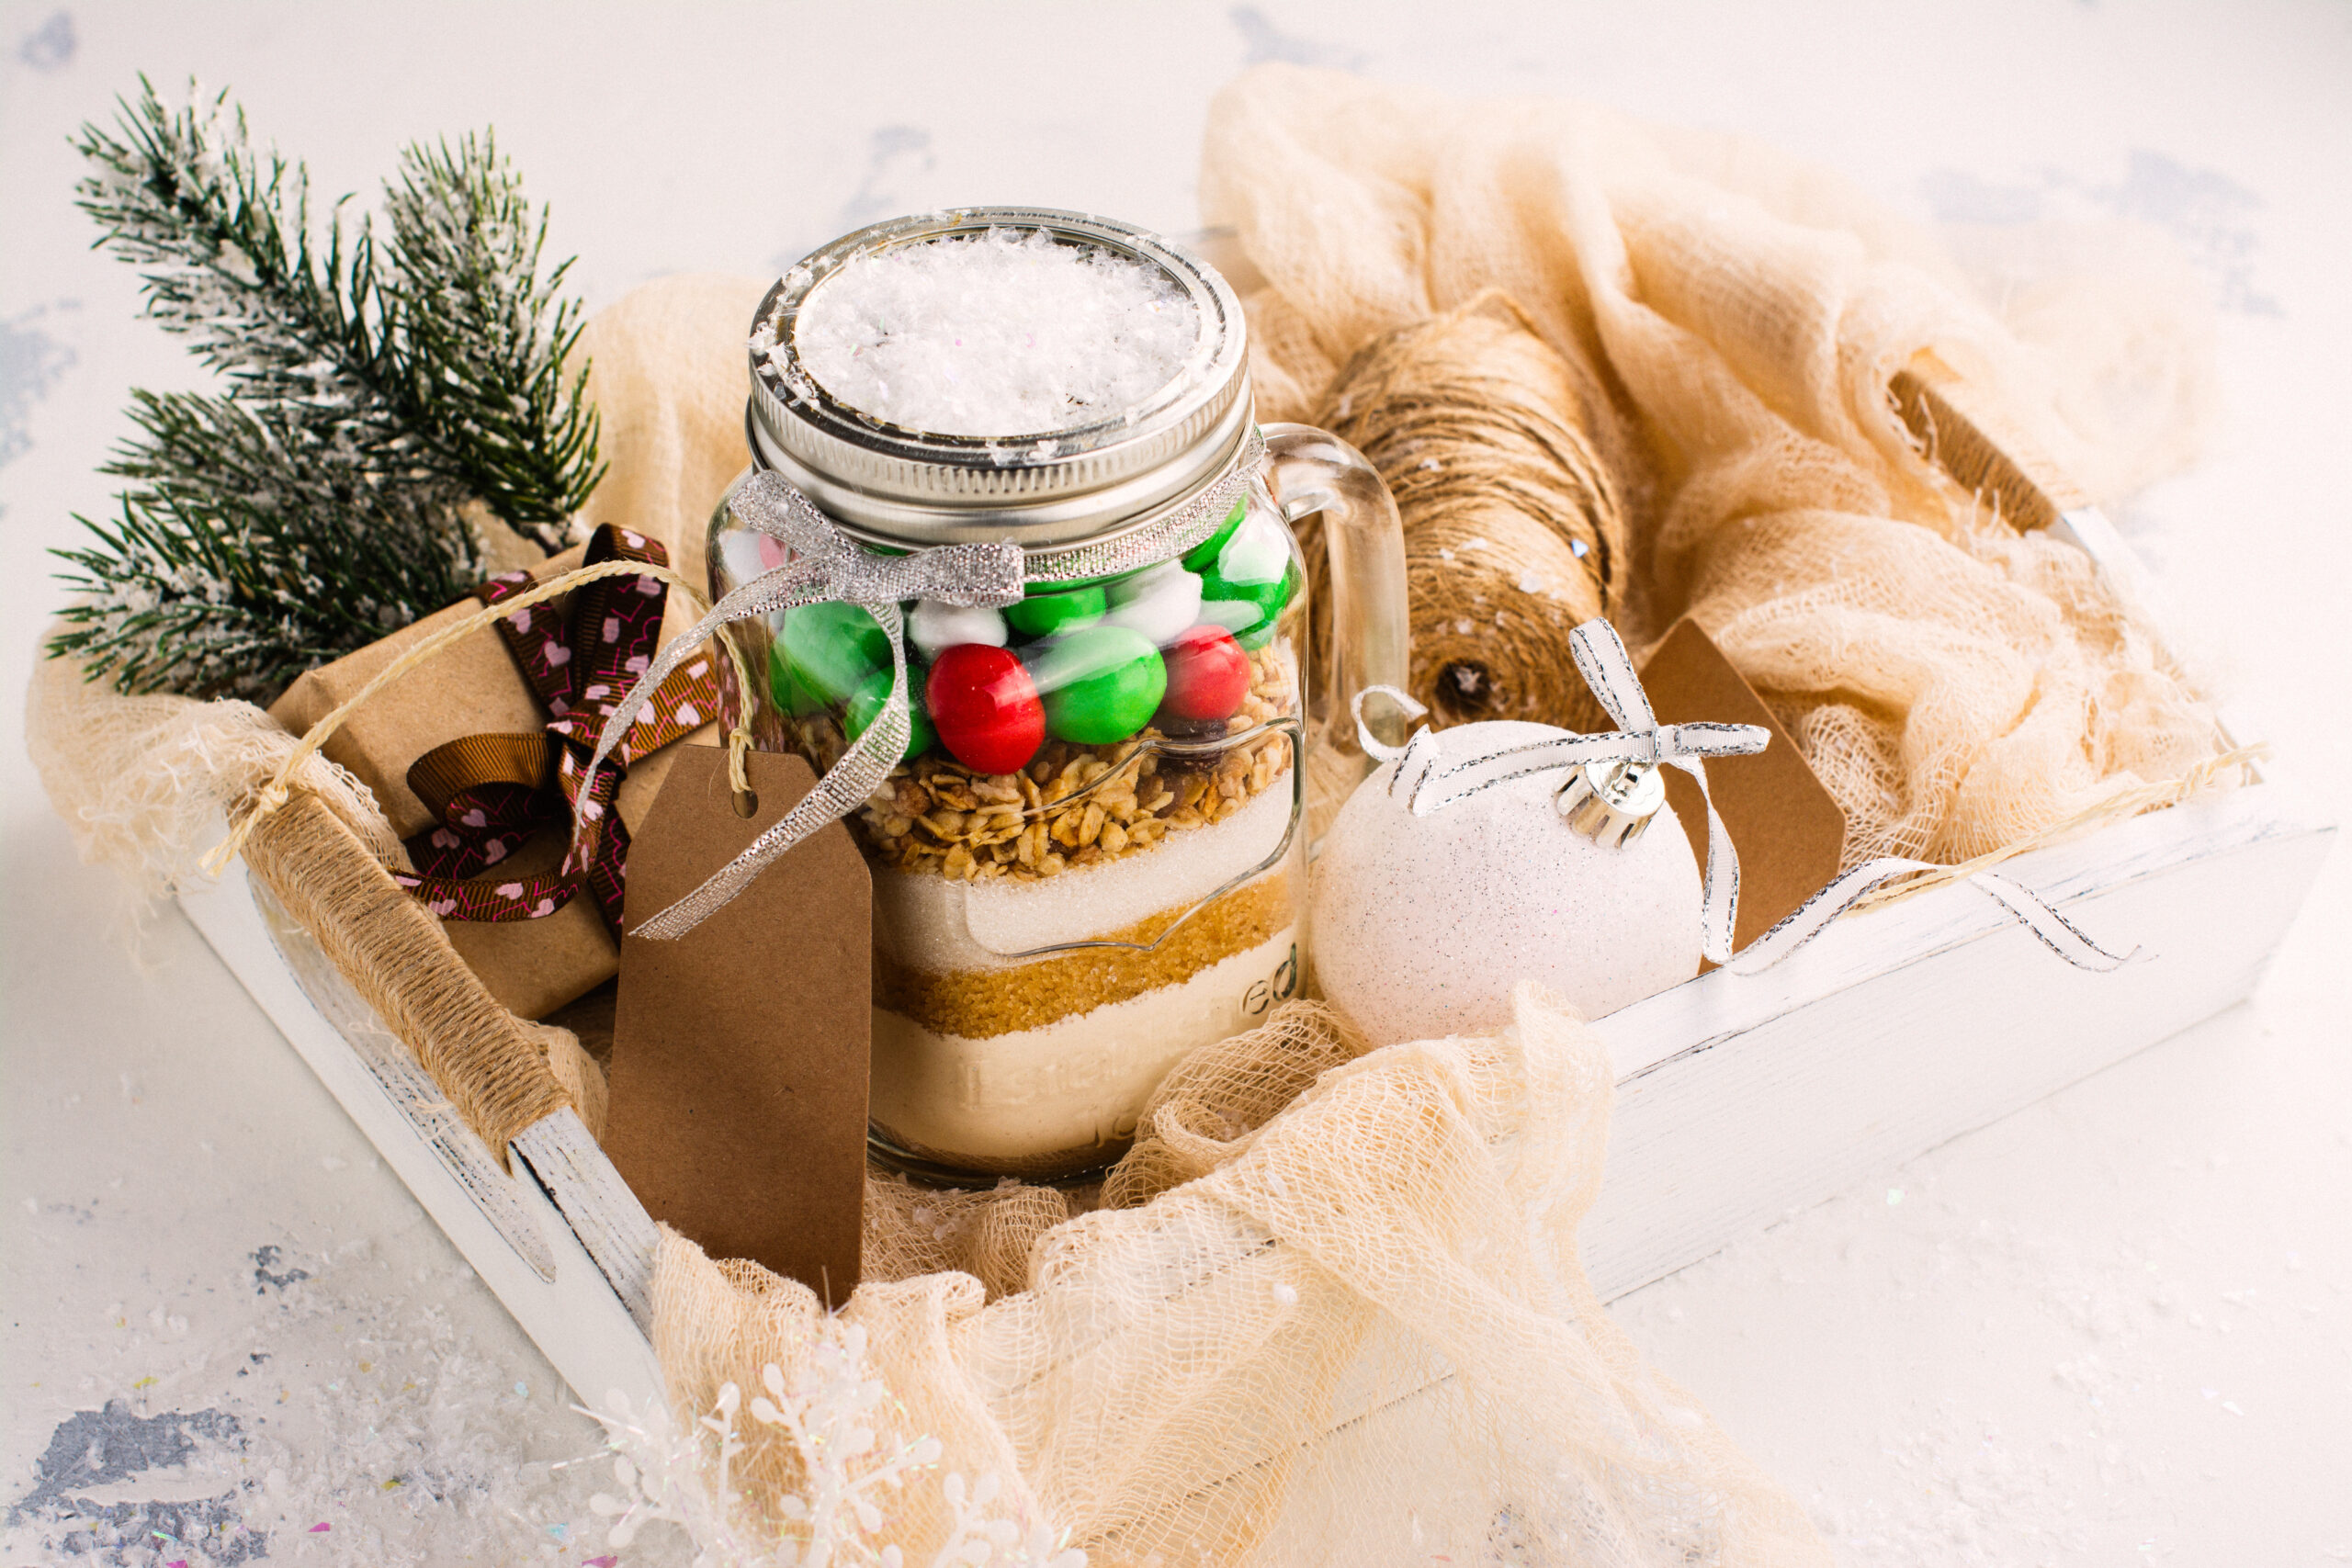 That Winsome Girl: DIY Gift Idea: Present Homemade Cookies in Mason Jars